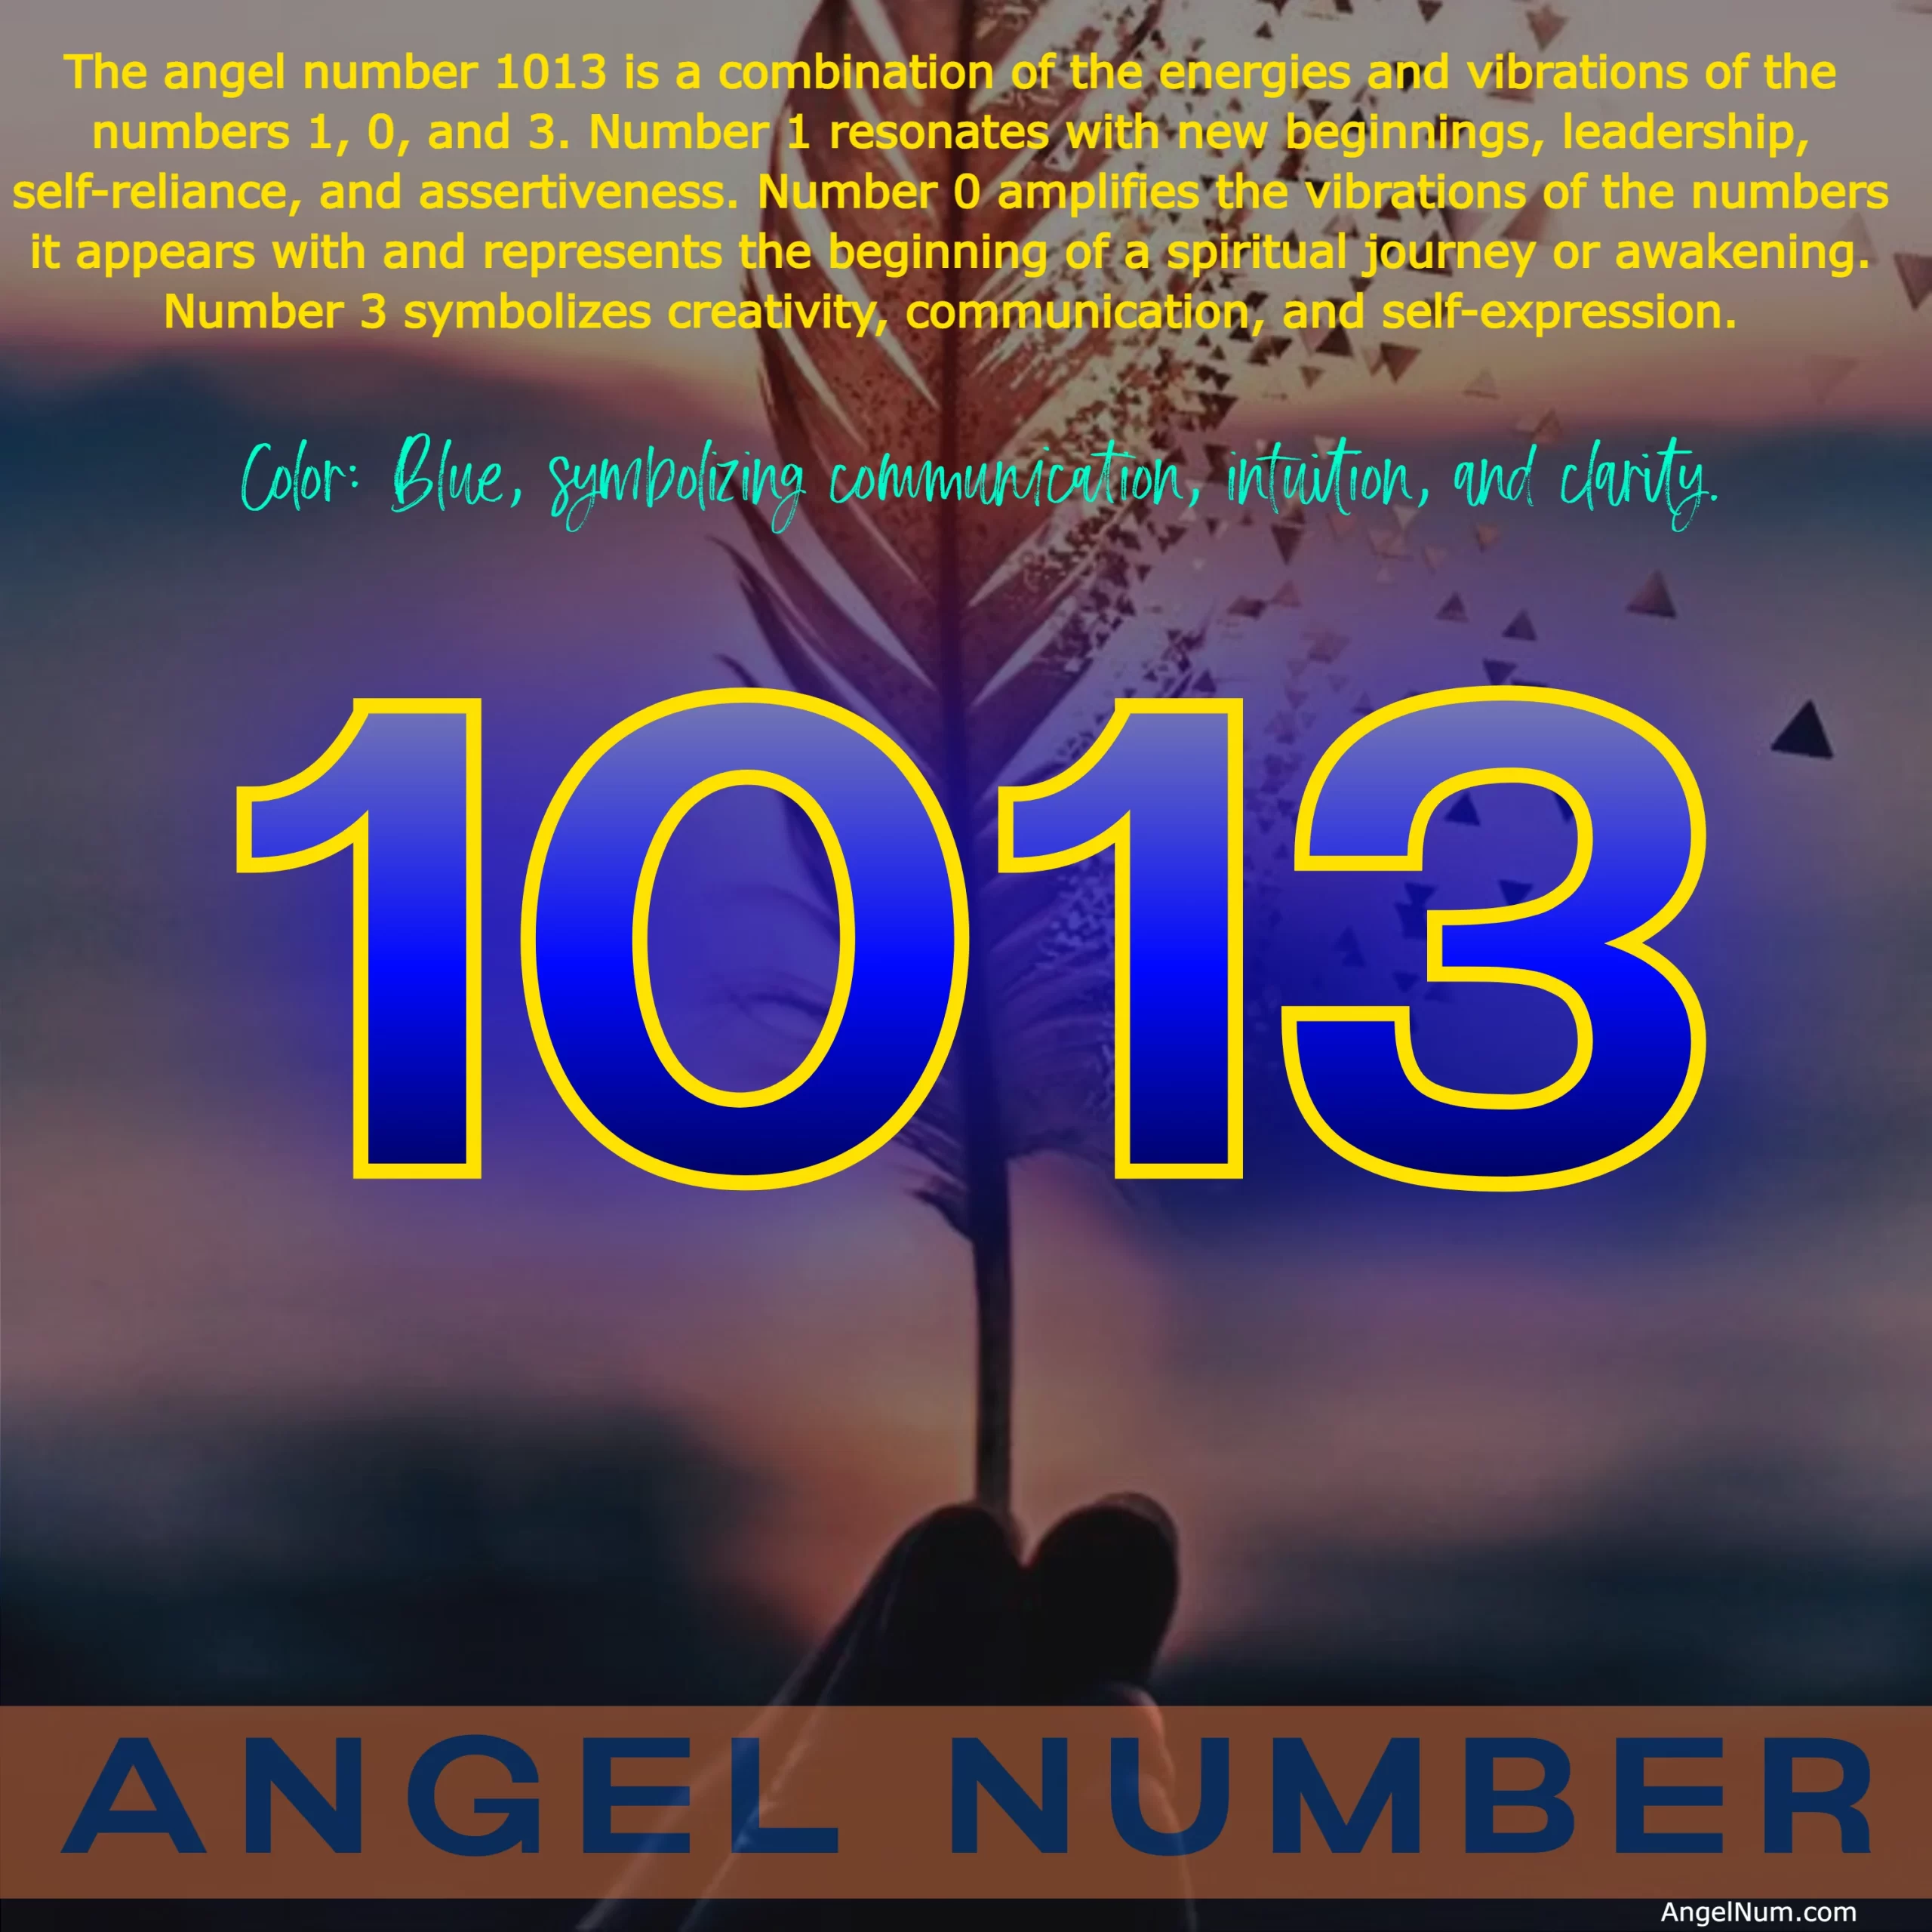 Angel Number 1013: Trust Your Abilities and Take Action